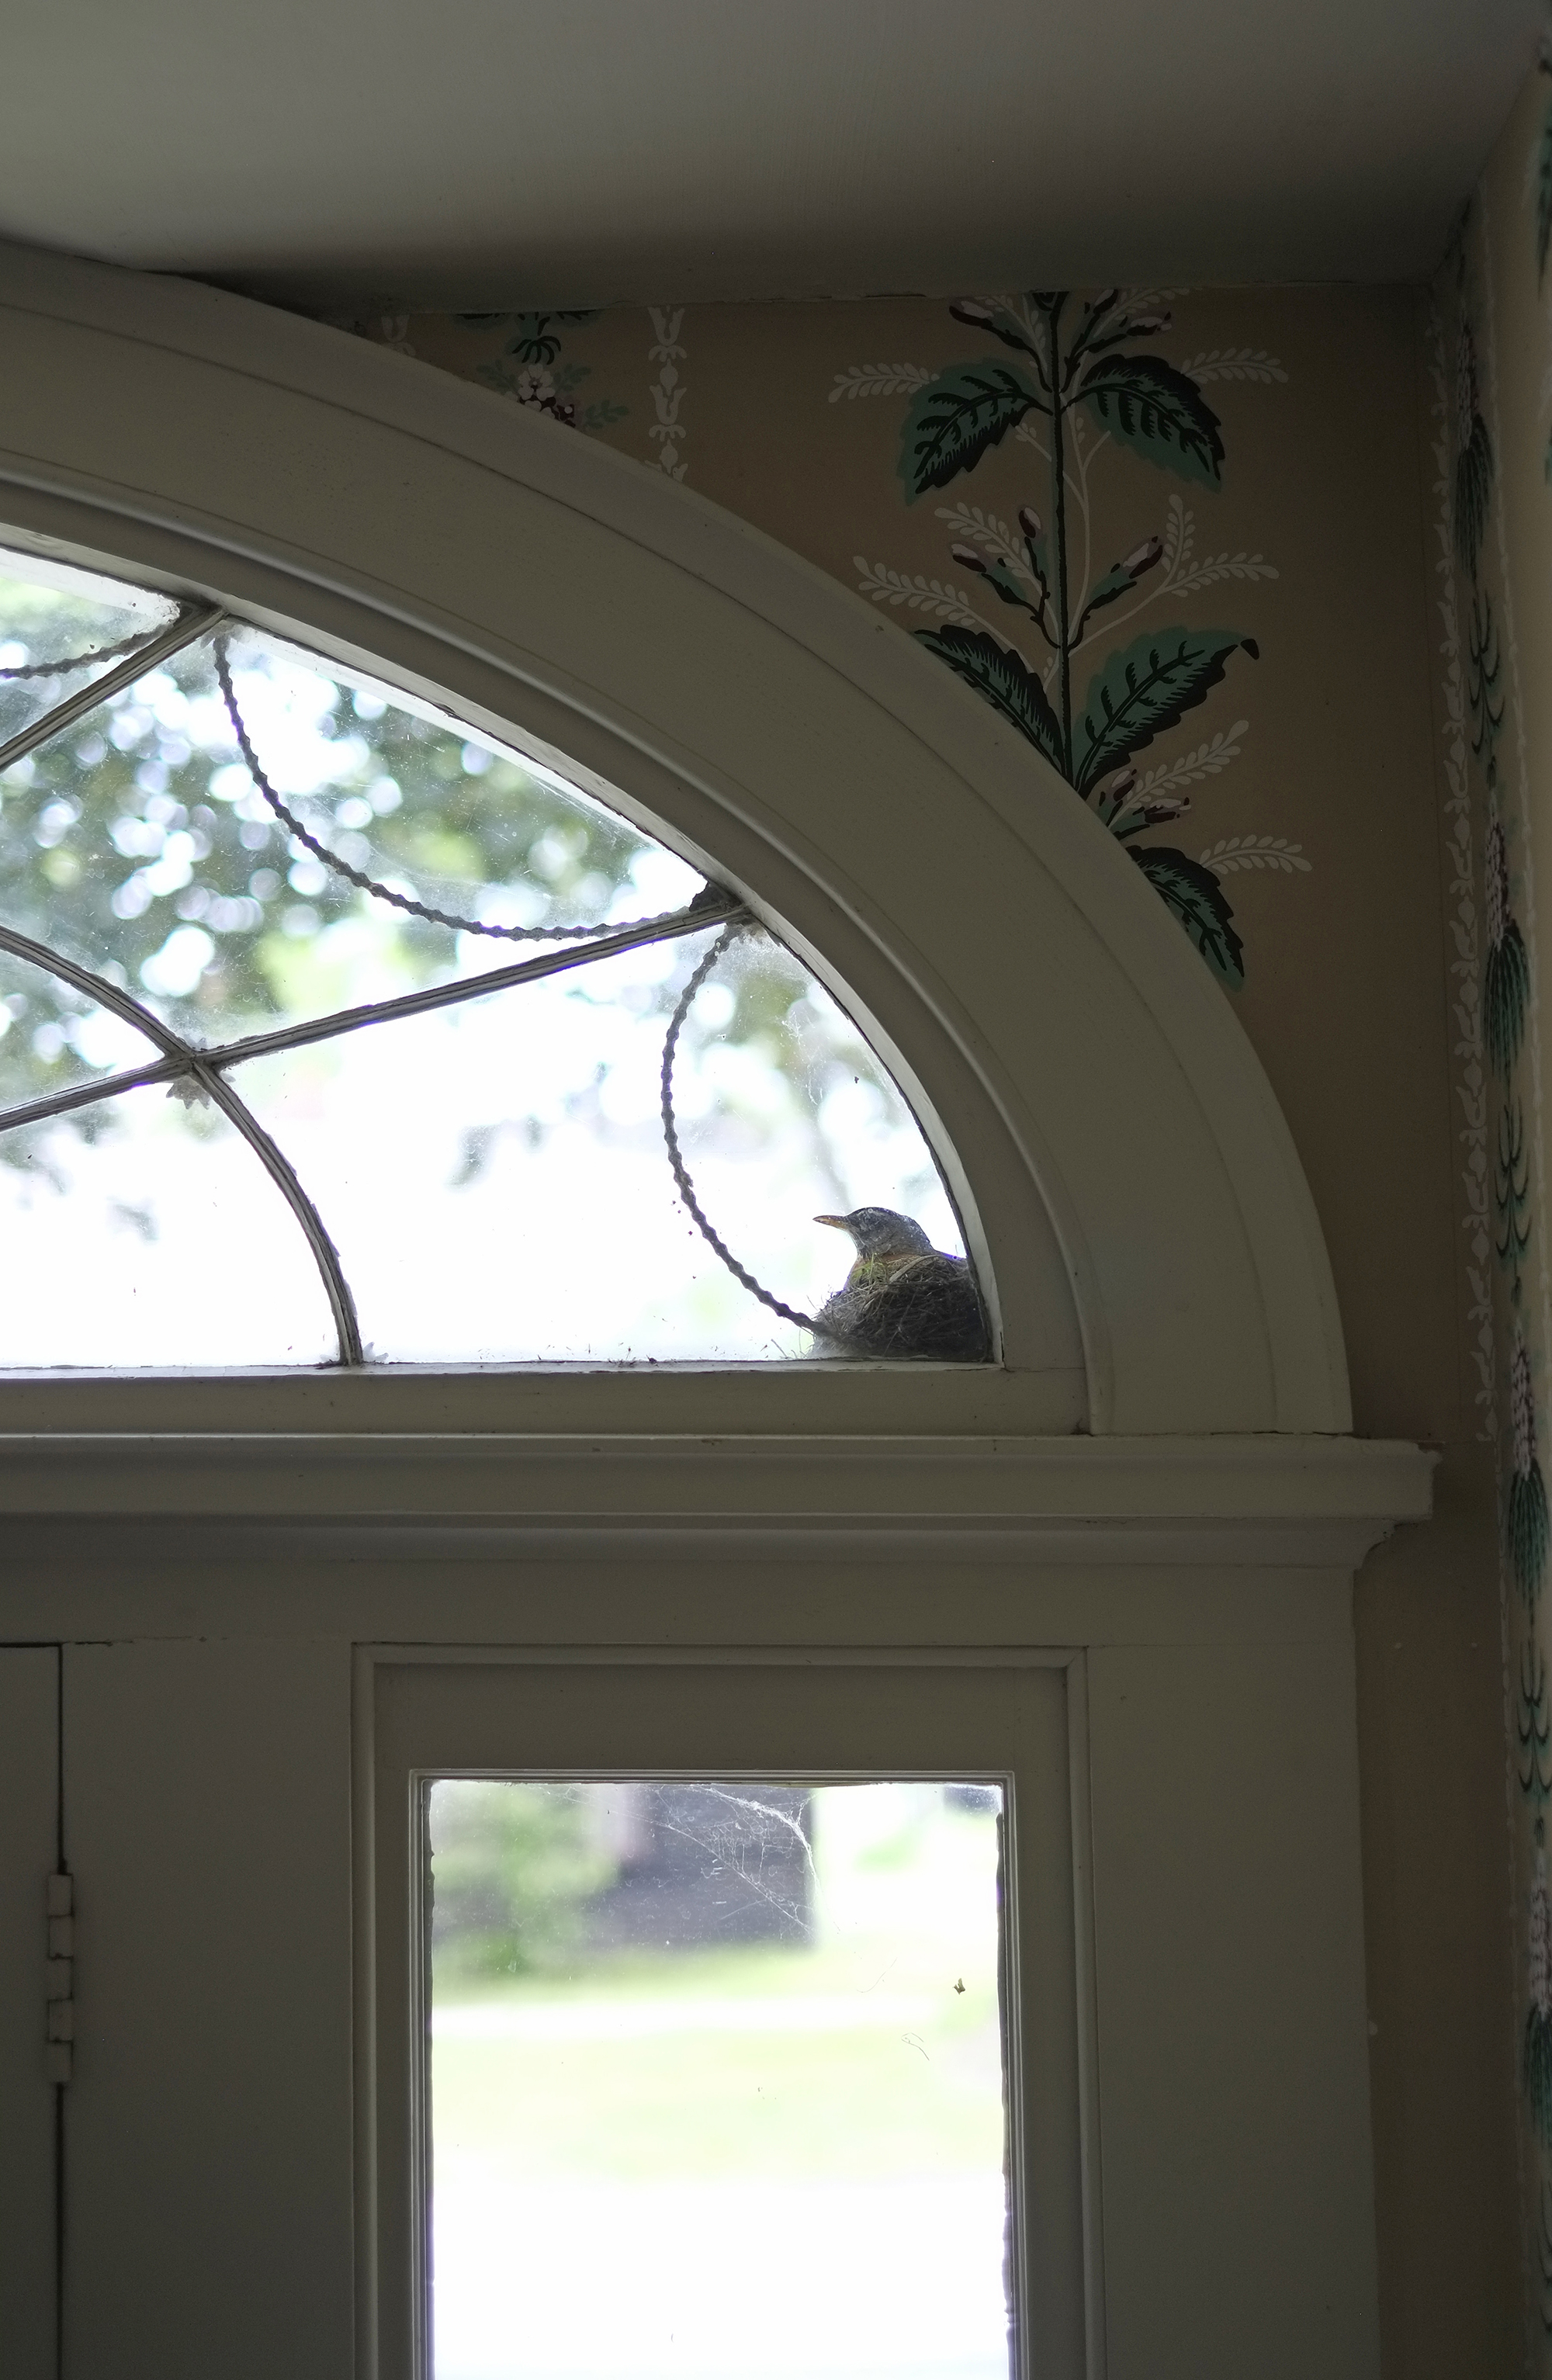 Nesting robin in the transom window at the front entry of Williams House.